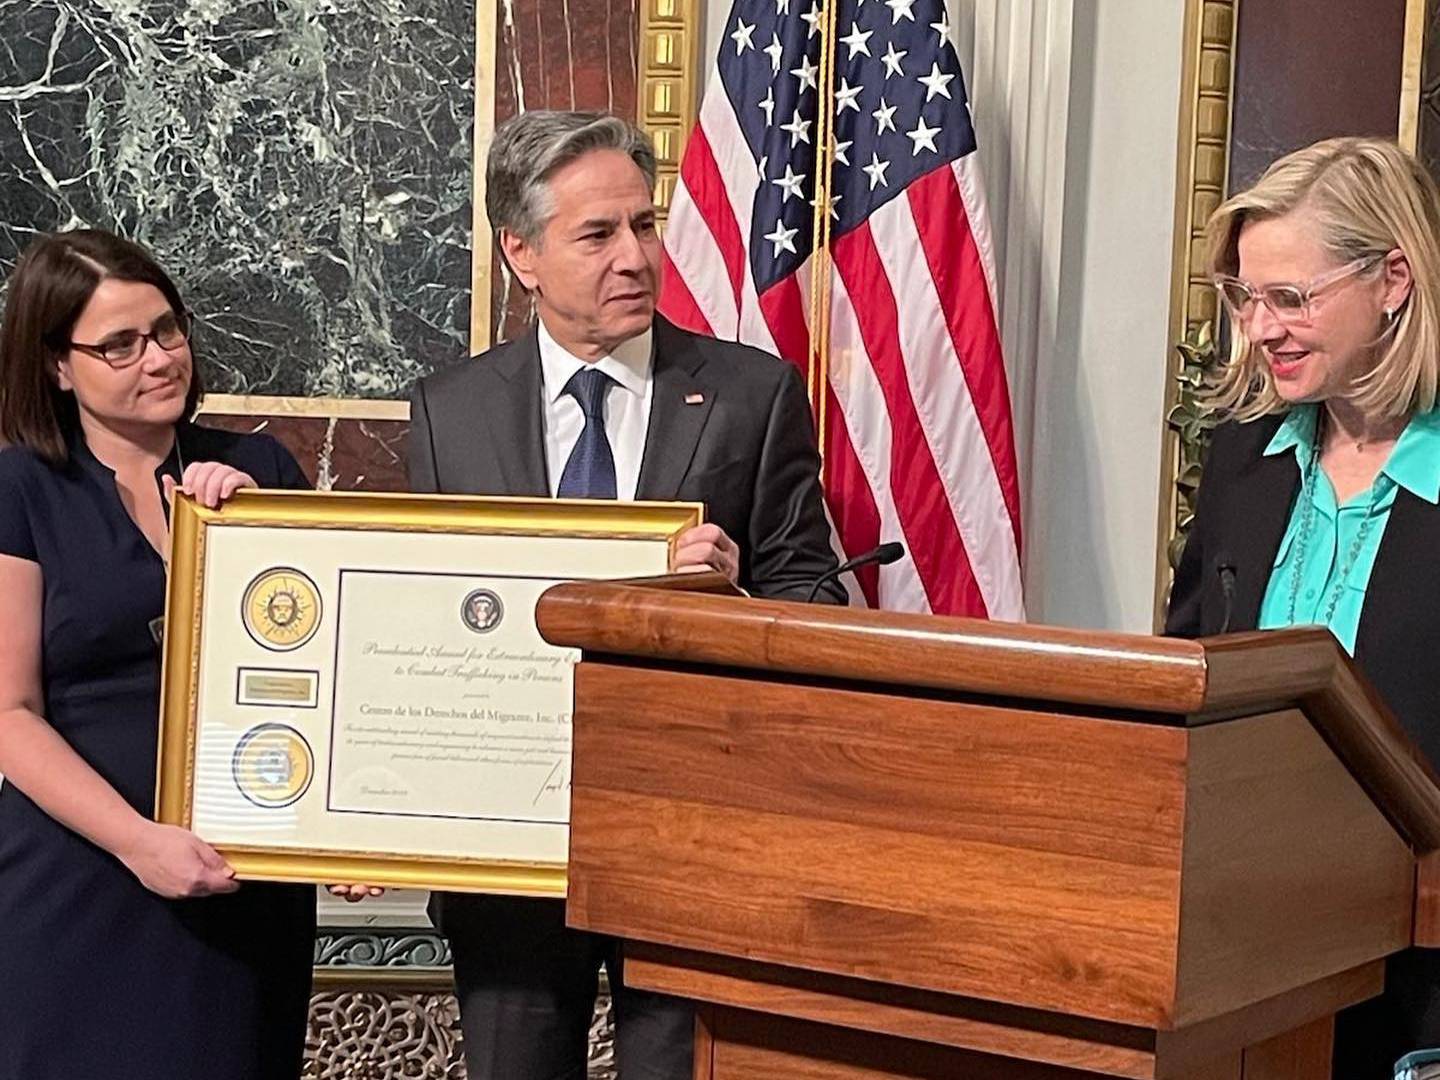 A woman holds a large, framed certificate with a man. Another woman stands at a lectern.